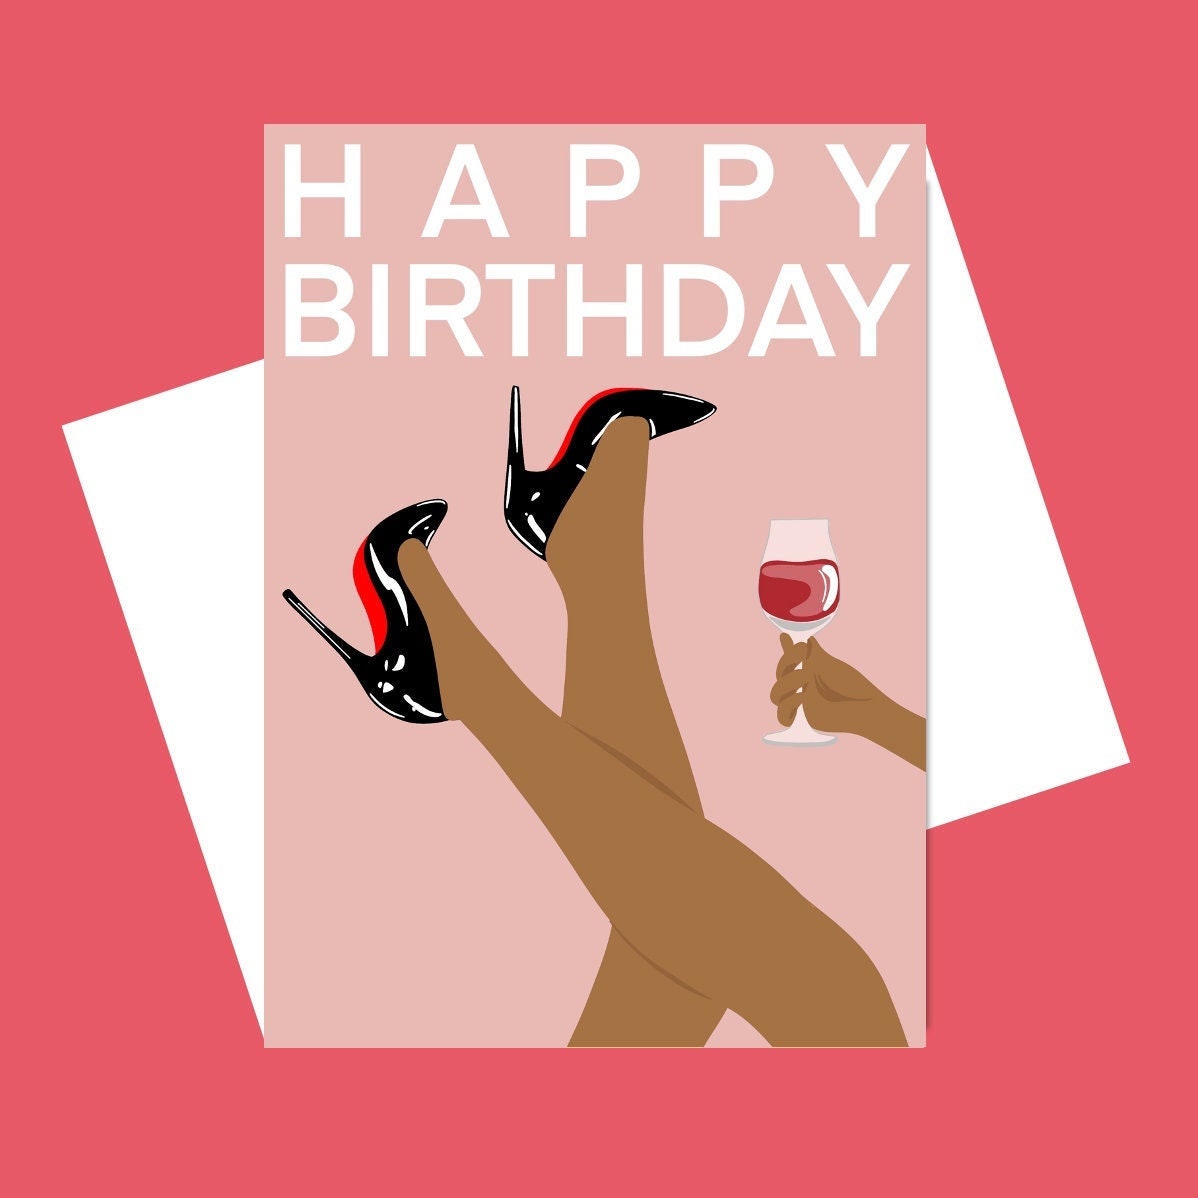 Birthday girl card/Shoes and wine lover card/Designer girl card/fun birthday card/happy birthday card/Red wine lover card/Wine lover/Shoes